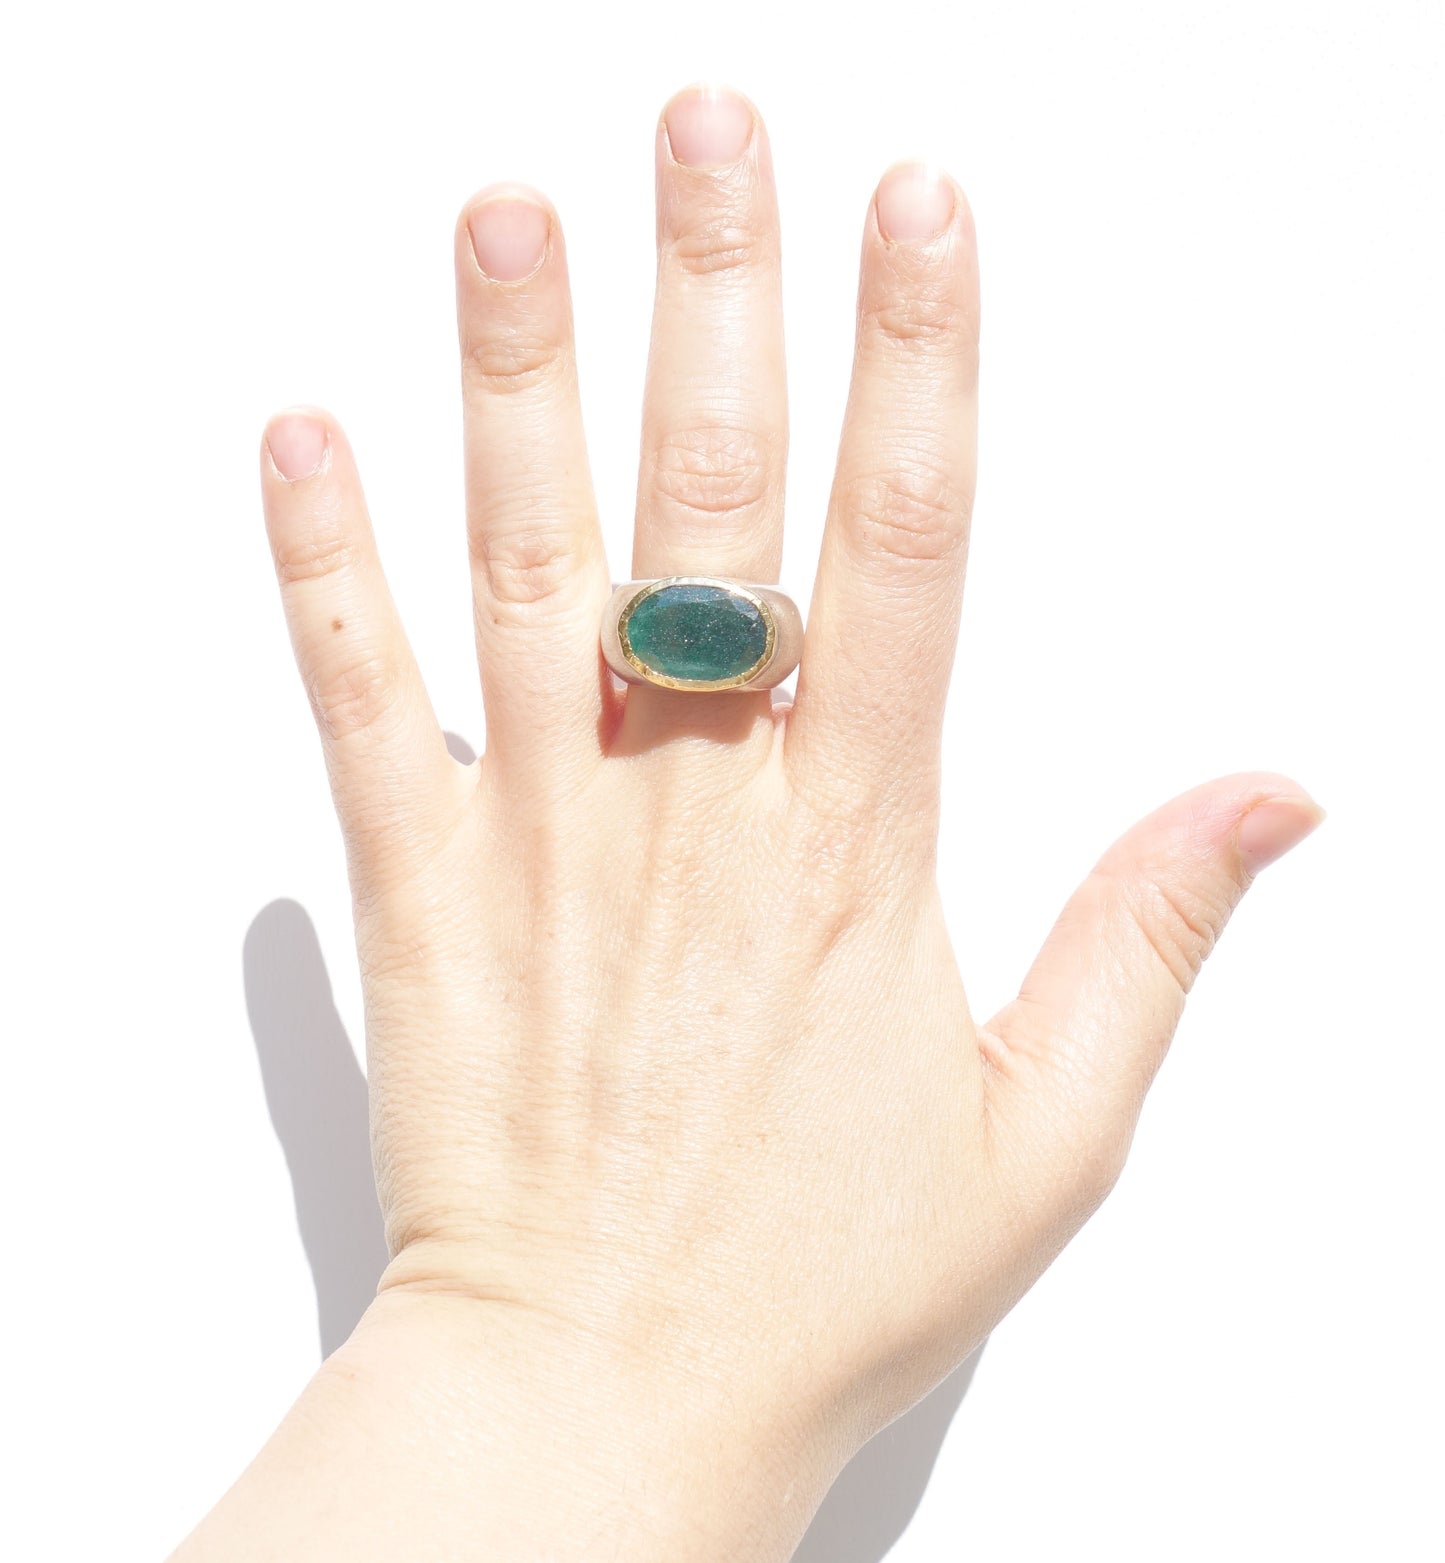 Oval natural Emerald ring, sterling silver ring with natural Emerald gemstone decorated with Gold, READY TO SHIP Size 8us